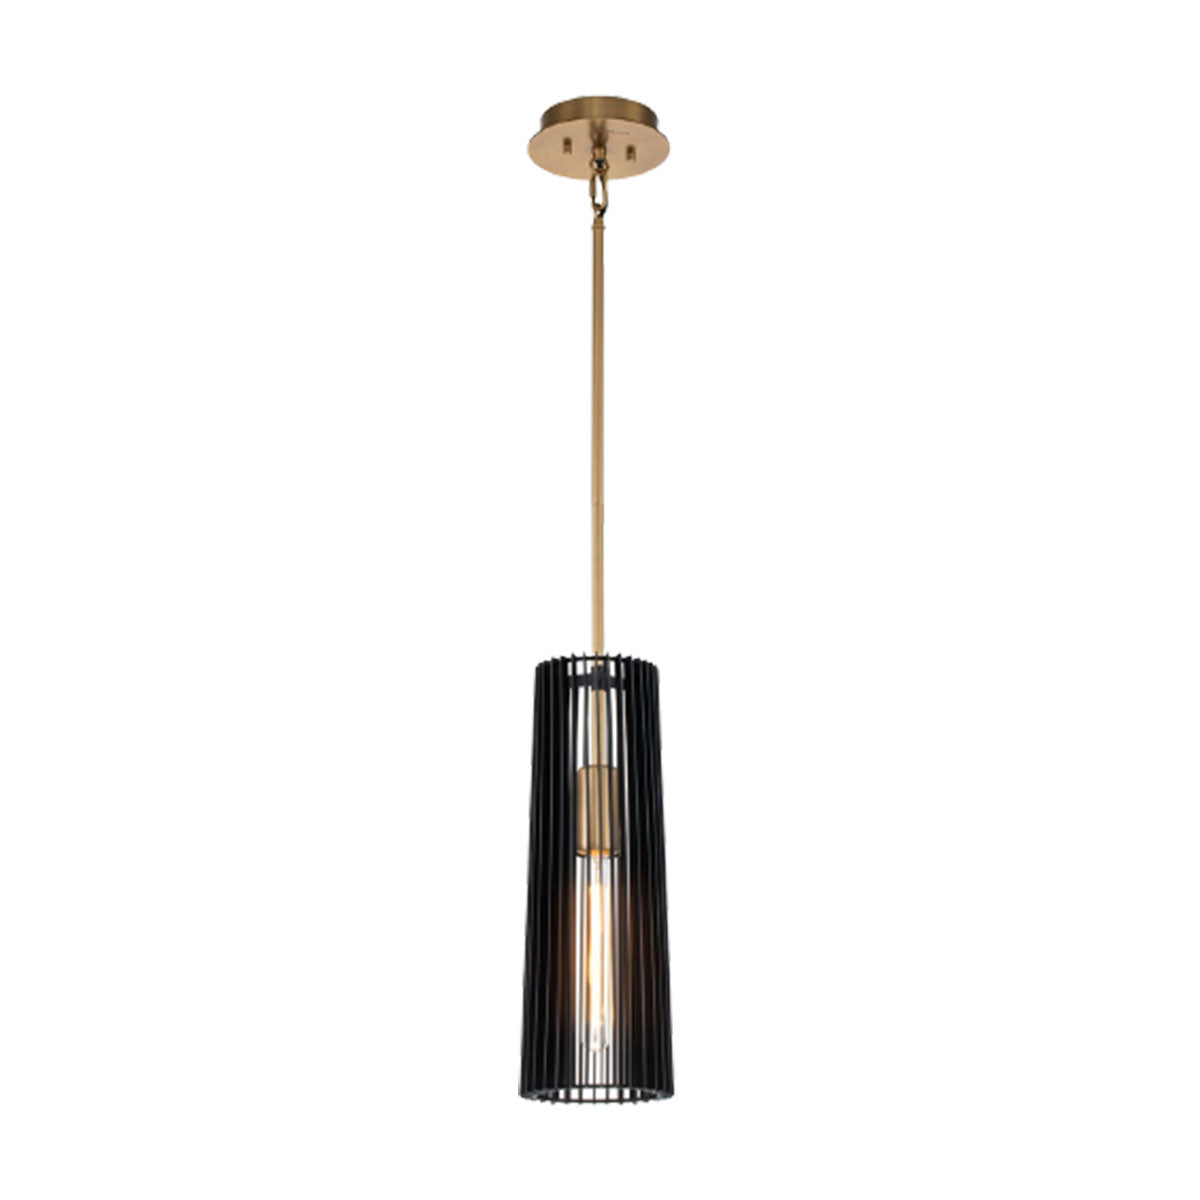 Single Ceiling Pendant In Natural Brass With Black Slatted Shade